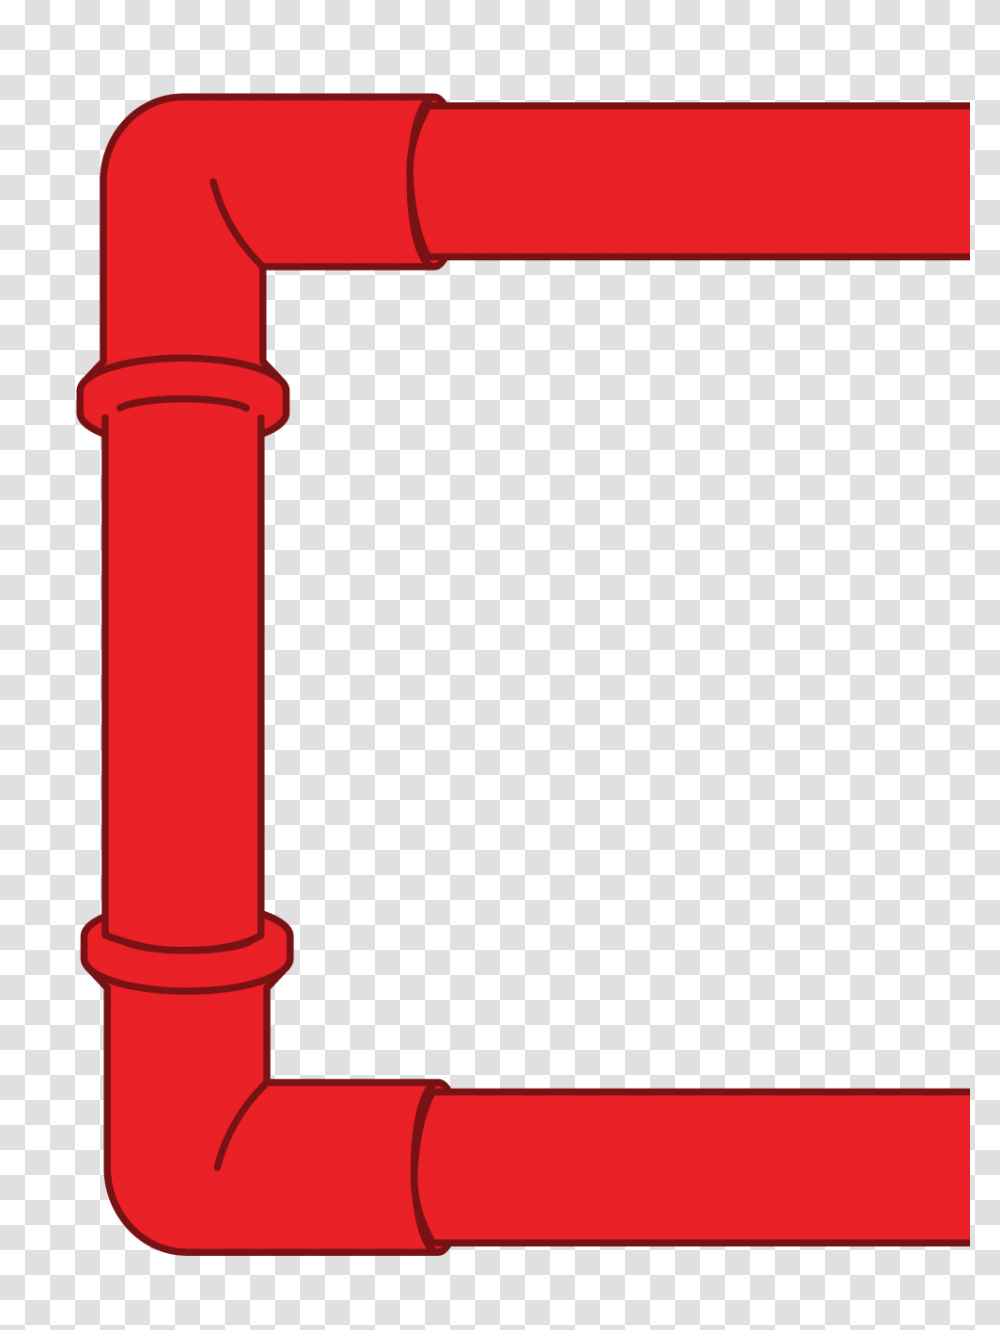 Plumbing Services Provided, Machine, Hammer, Tool, Hydrant Transparent Png